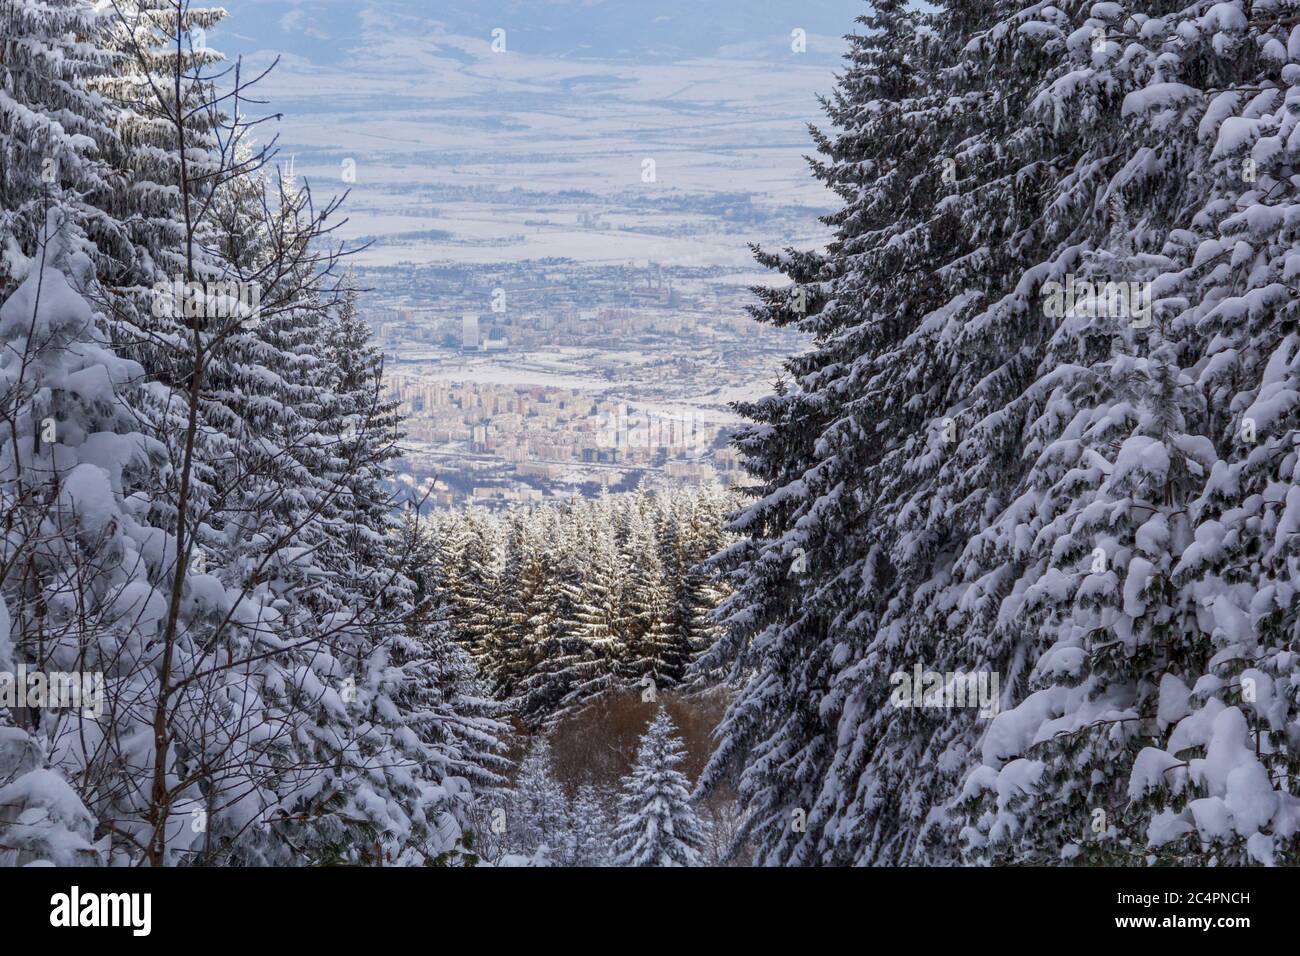 View of the city of Sofia from the mountain Vitosha in Winter. Stock Photo